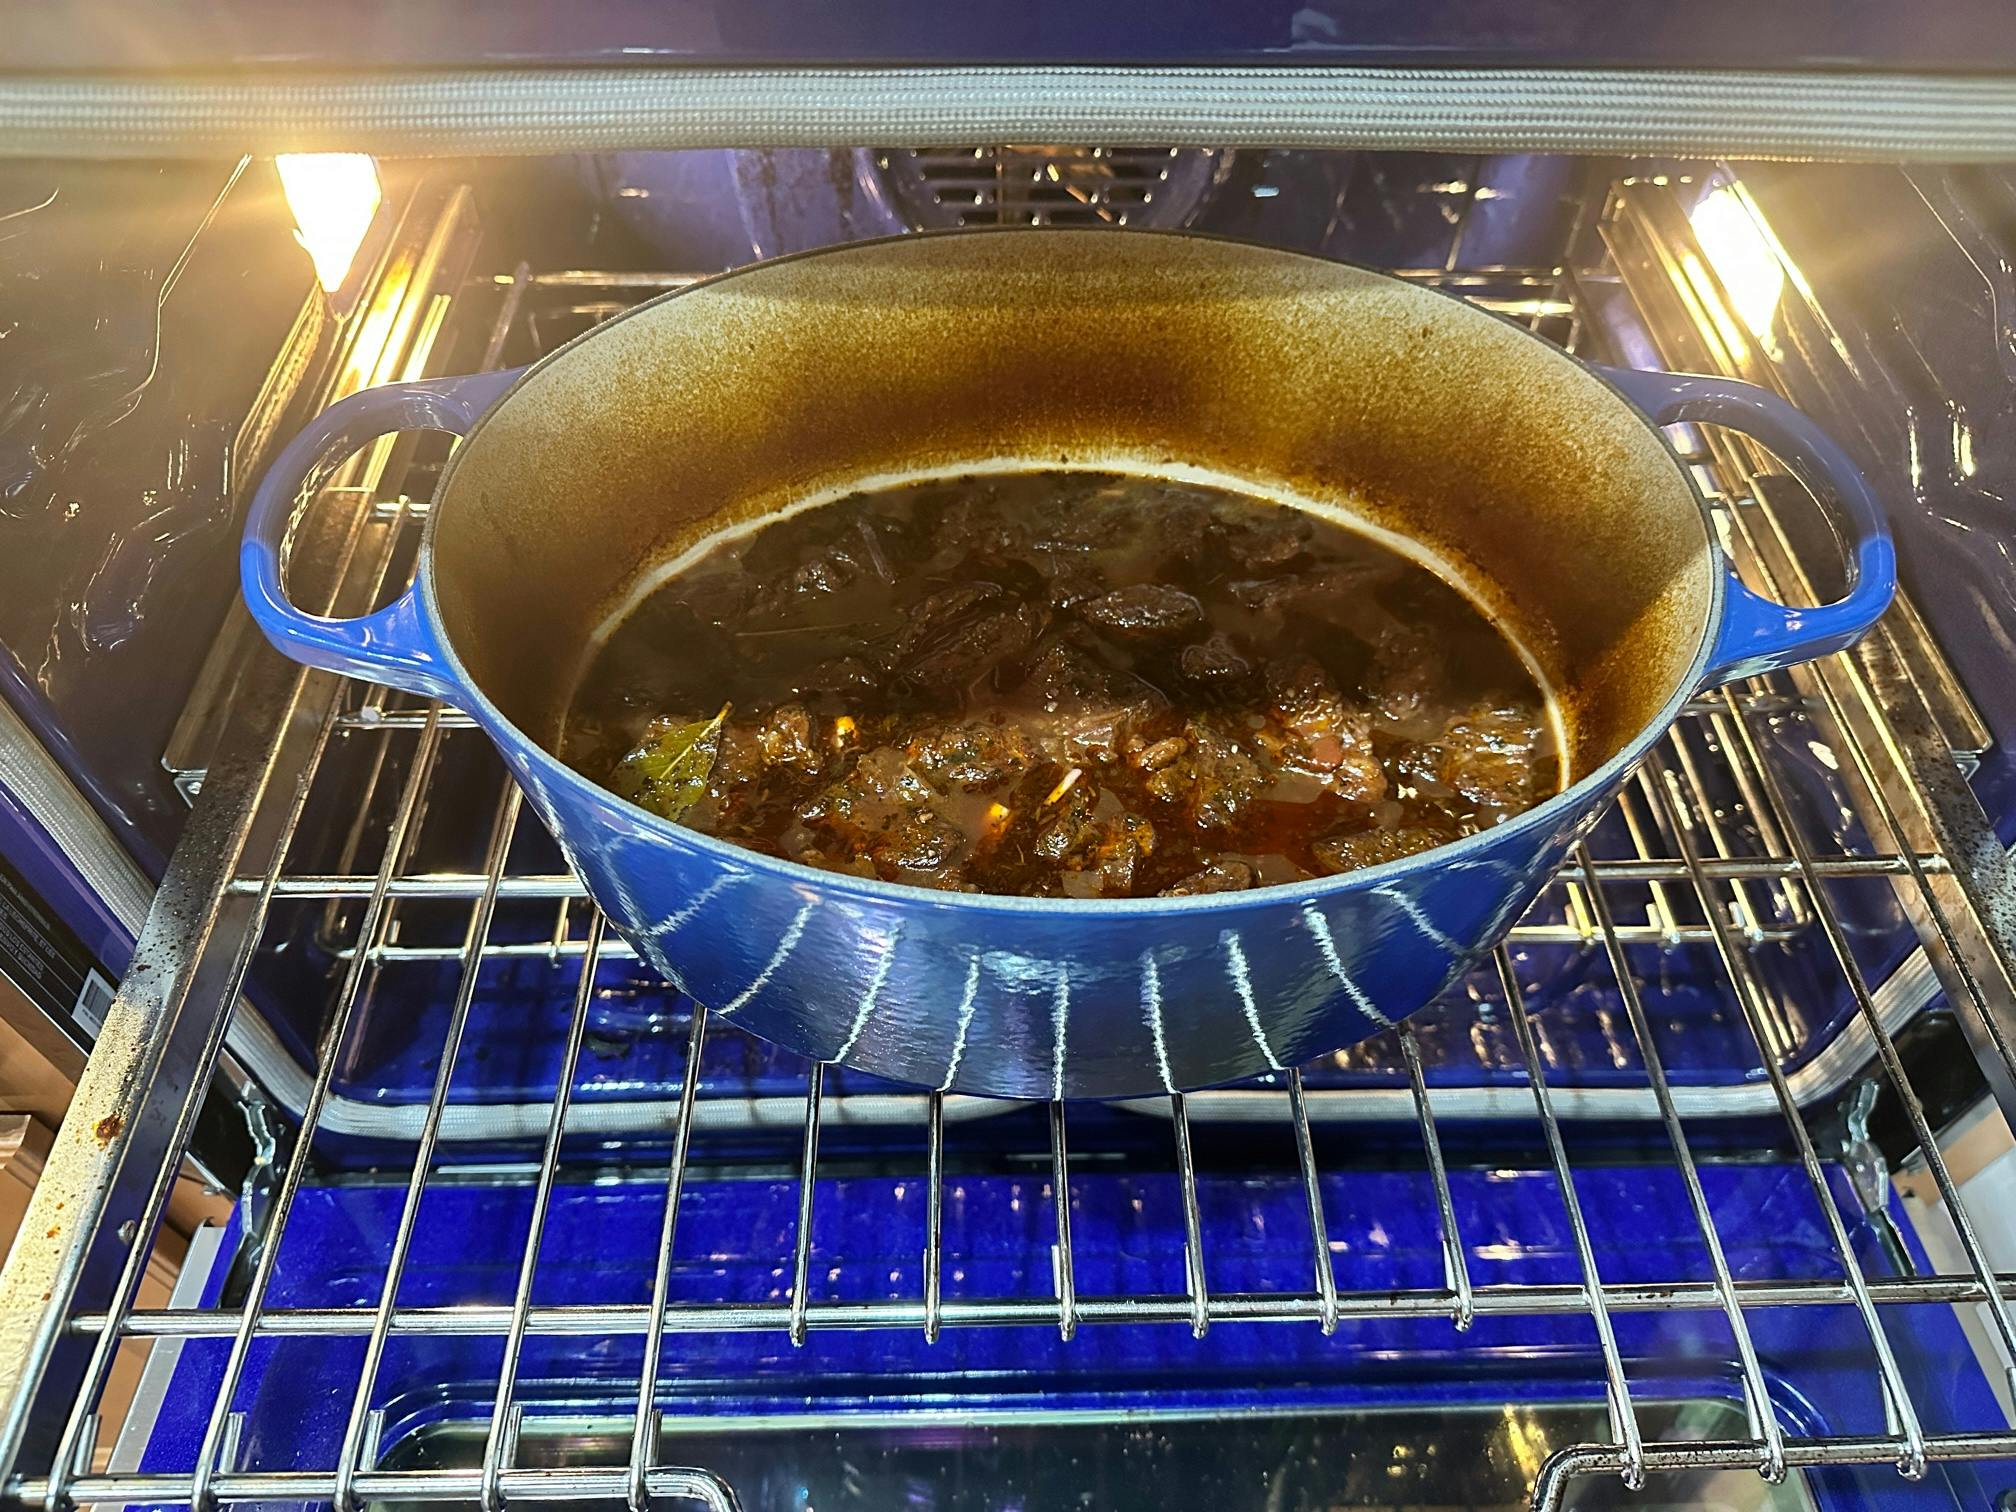 A Picture showing beef in a large Le Crusete pot in an oven